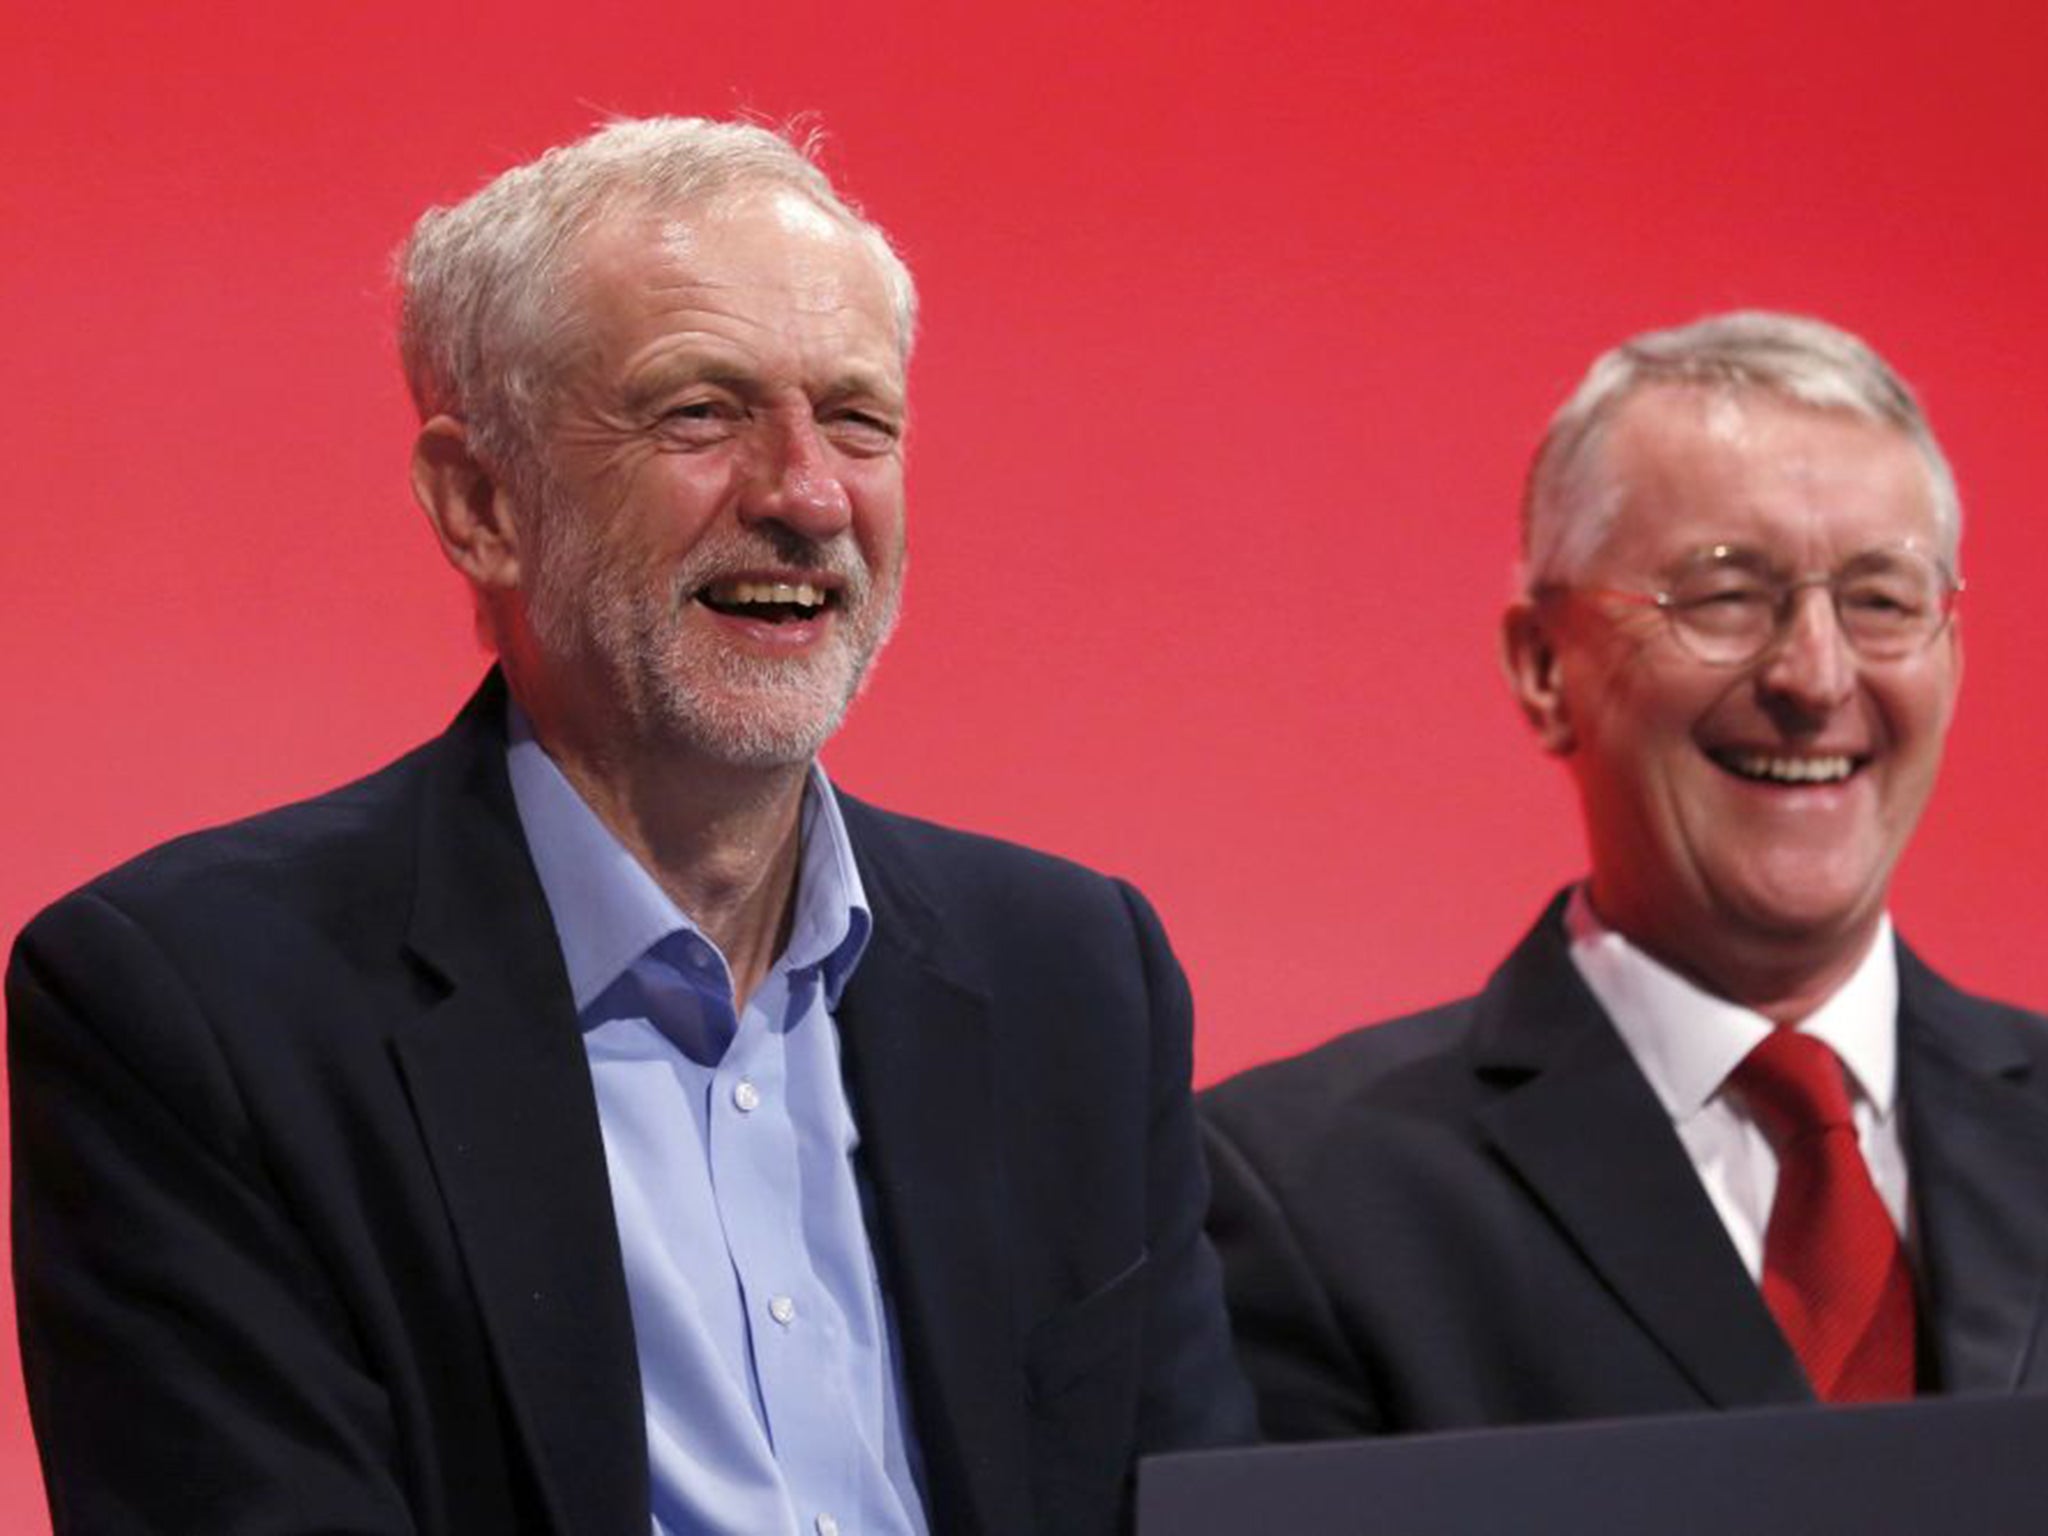 Labour leader Jeremy Corbyn shares the limelight with shadow Foreign Secretary Hilary Benn at party conference